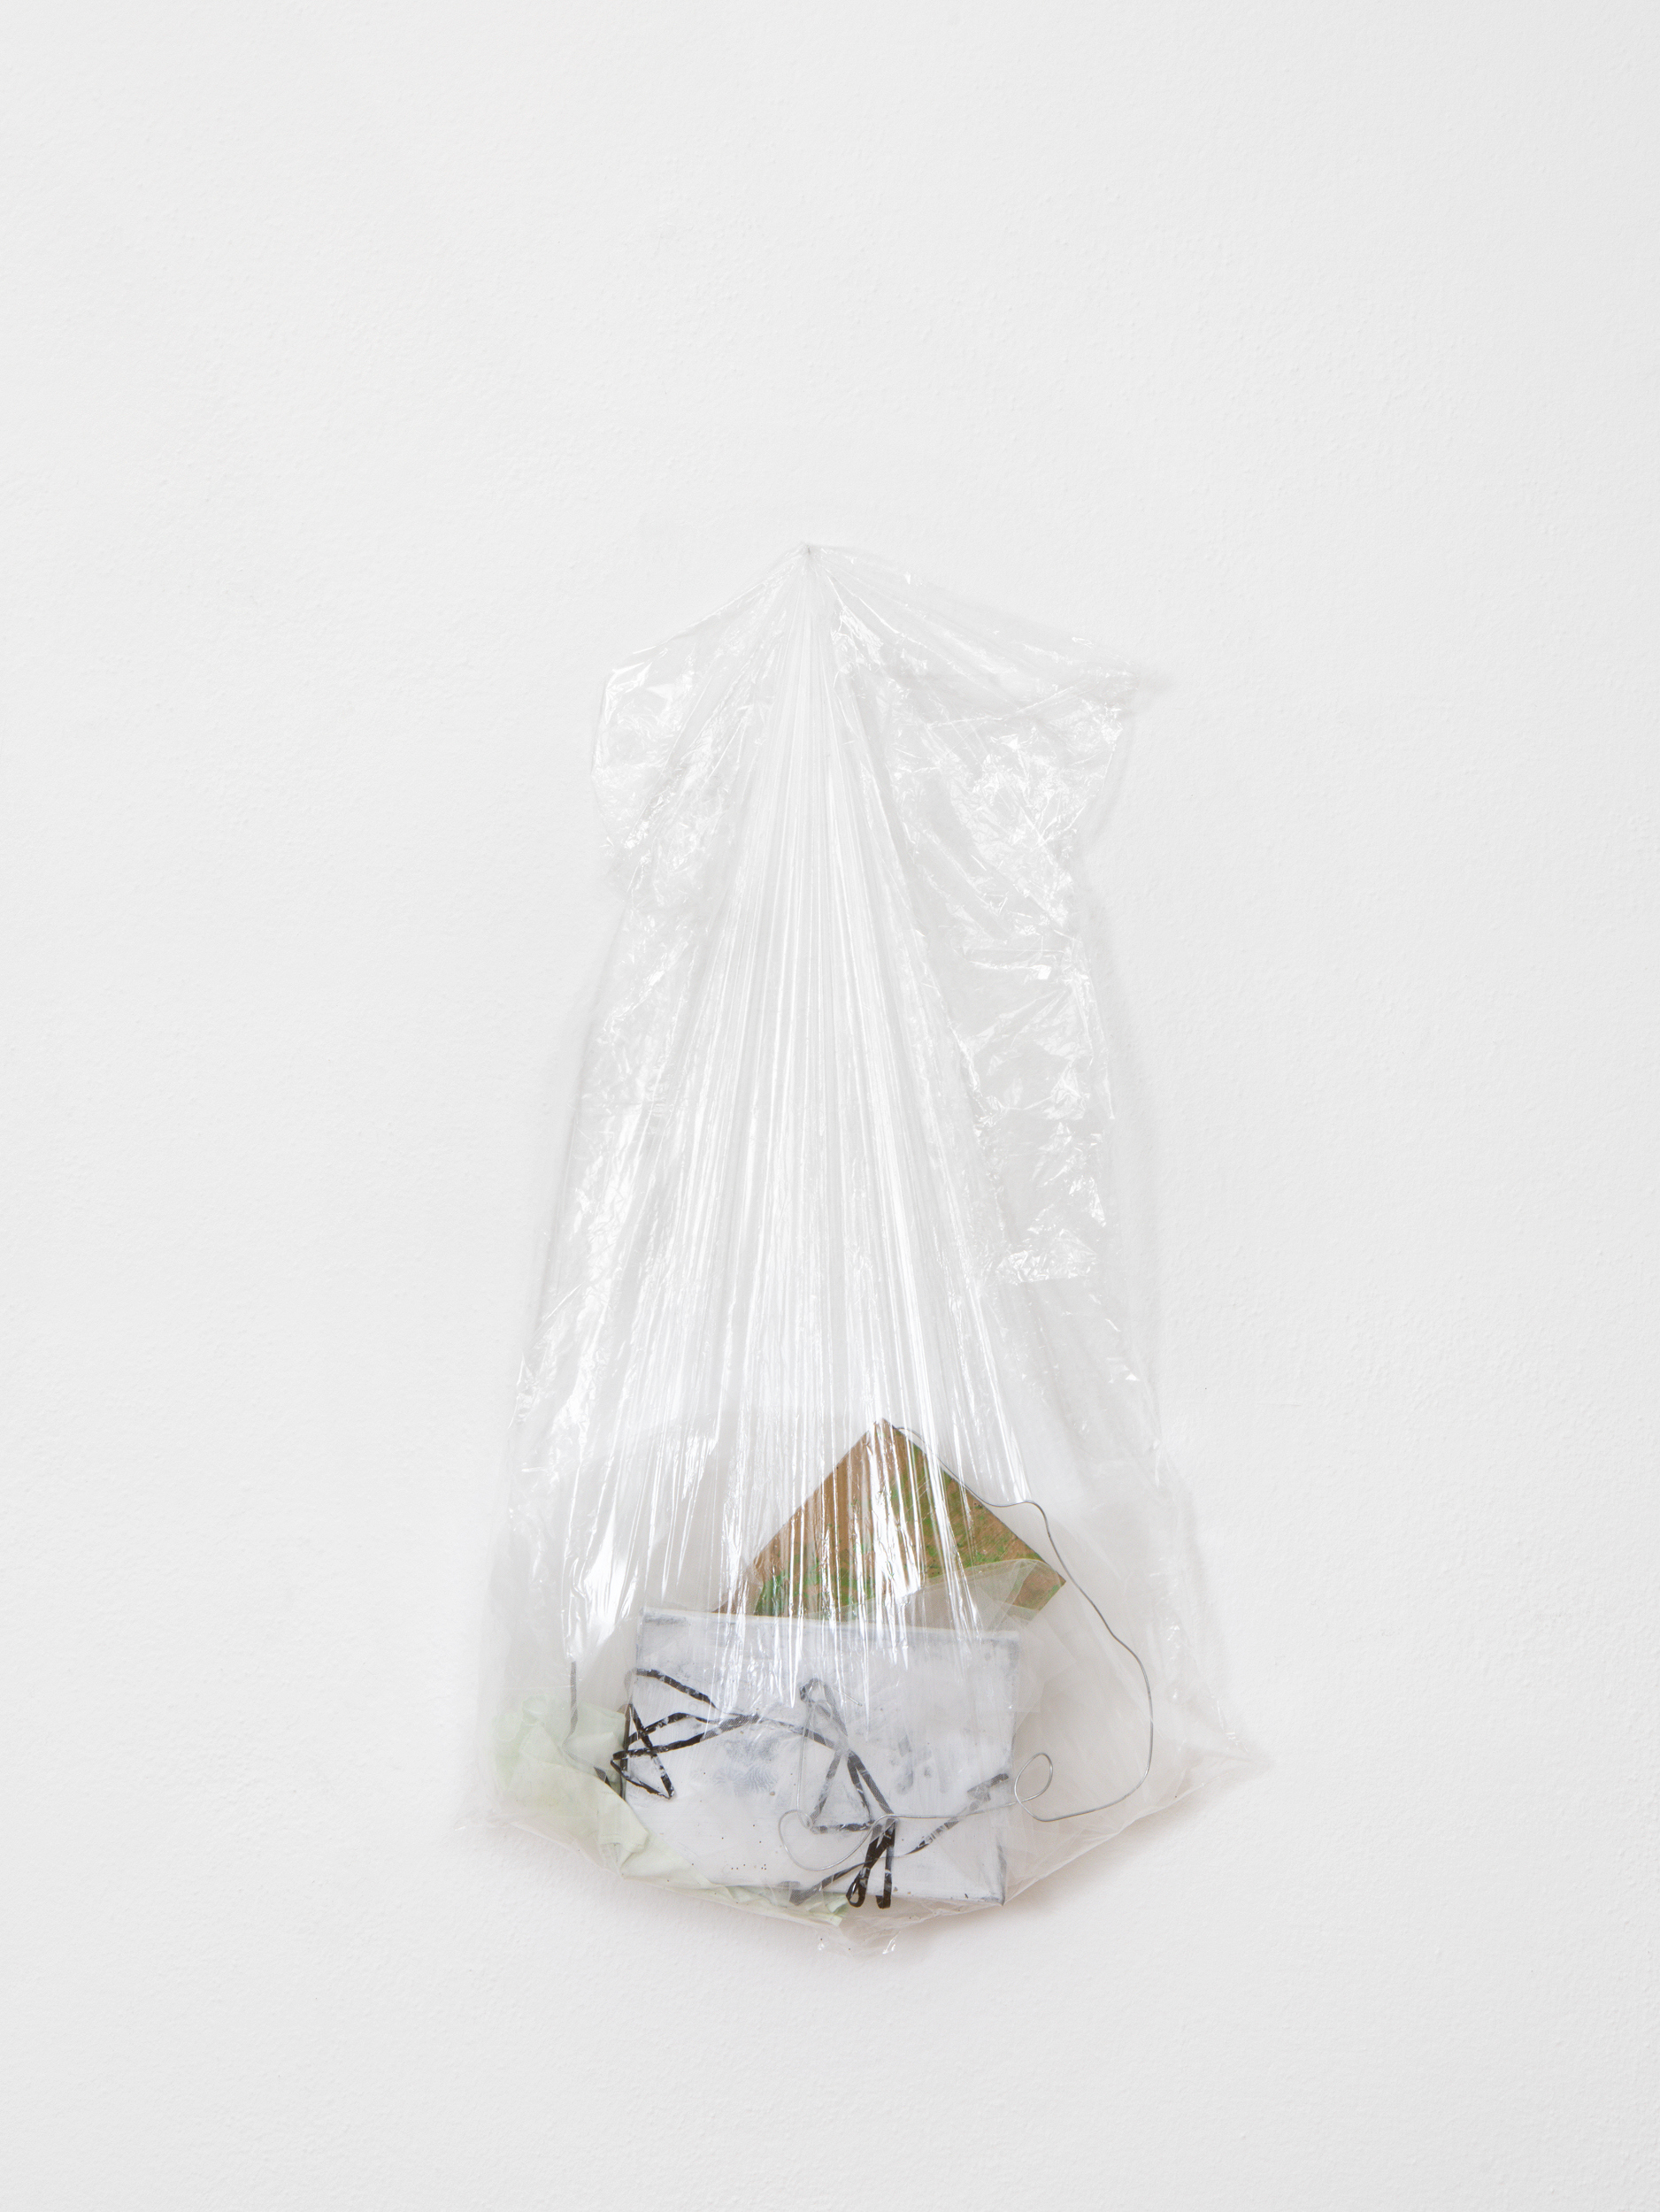 Jasmine Gregory Bundle no.13, 2024 Oil, acrylic and glitter on linen, cardboard, wire and plastic,100 x 50 cm